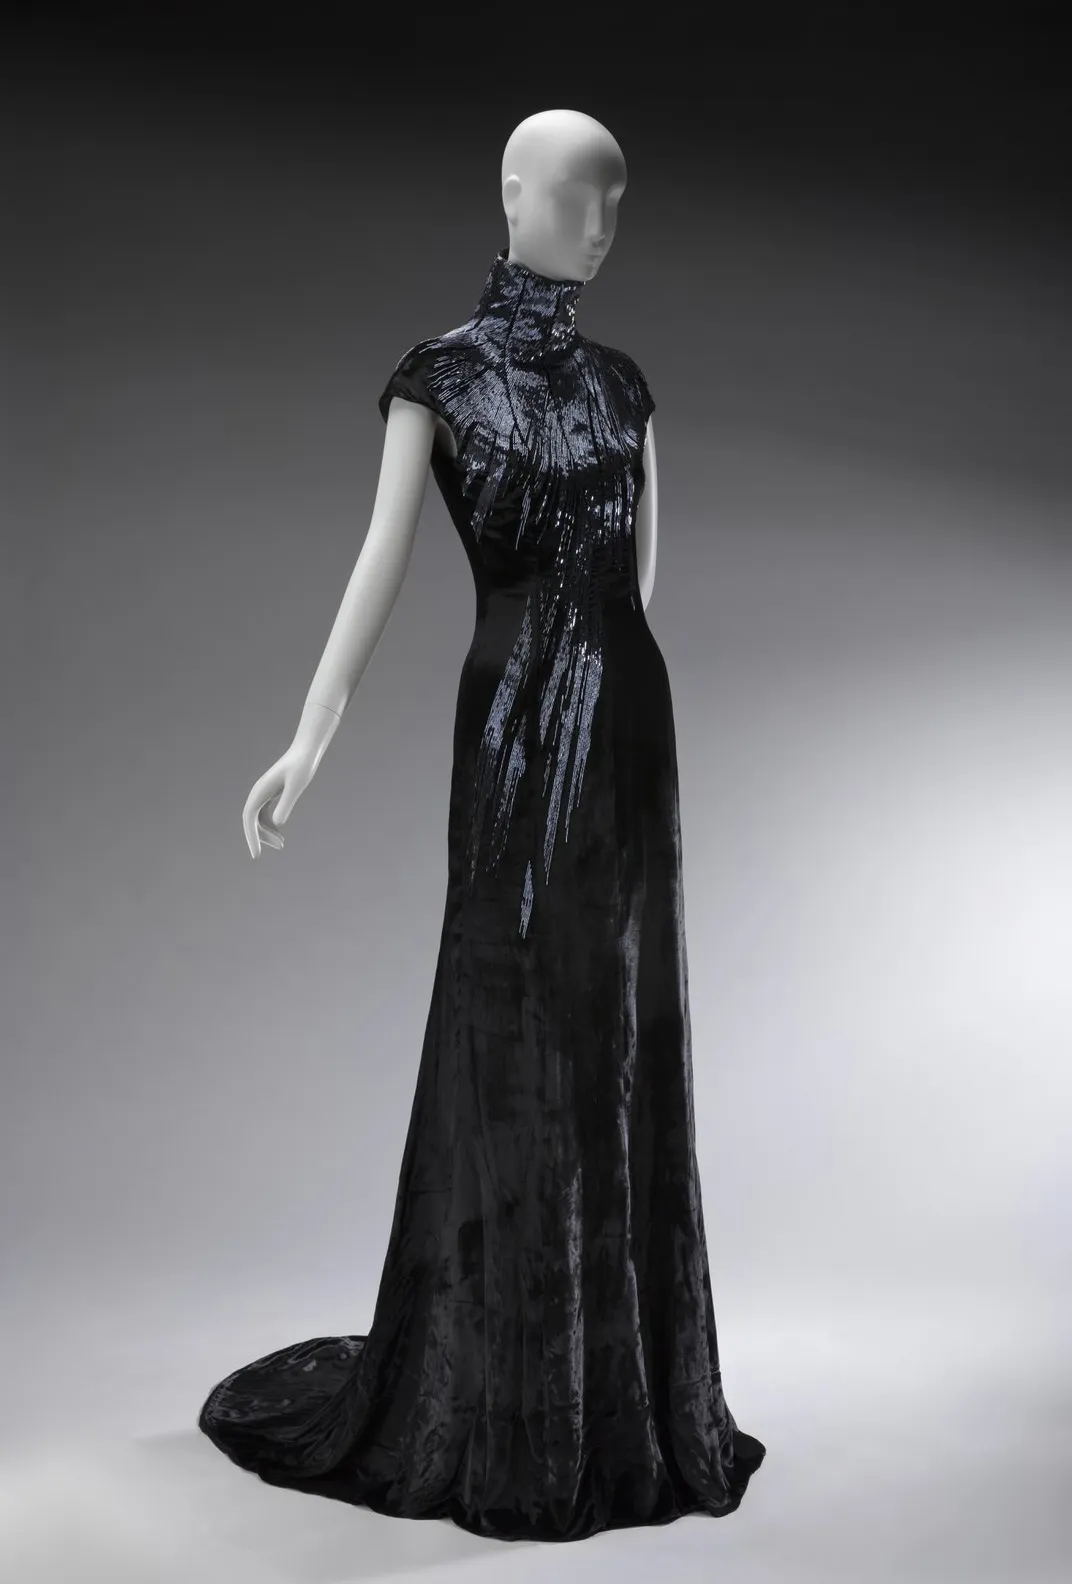 A form fitting velvet black dress with sequins running down from the neckline